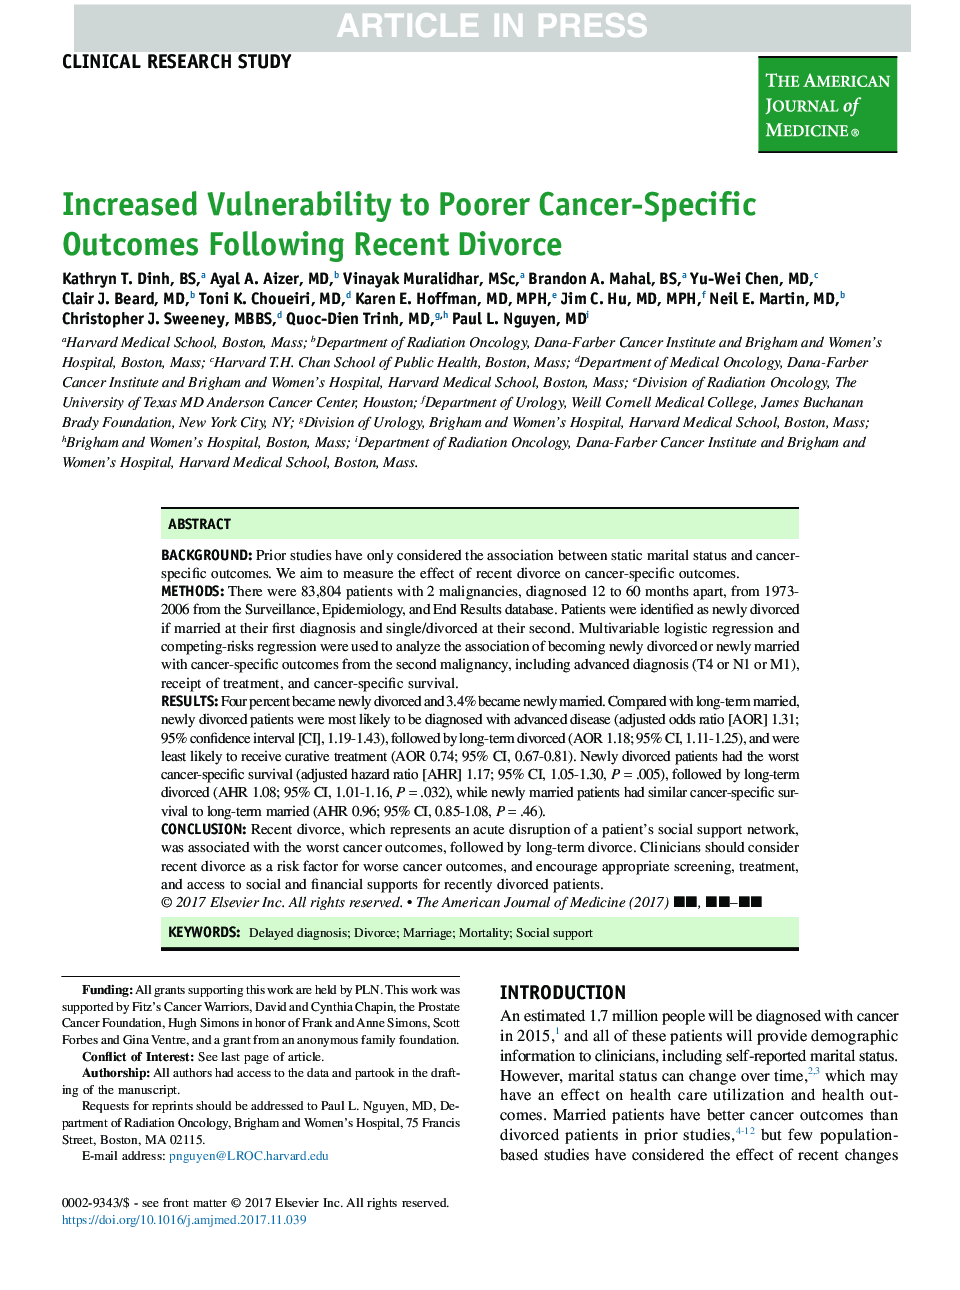 Increased Vulnerability to Poorer Cancer-Specific Outcomes Following Recent Divorce